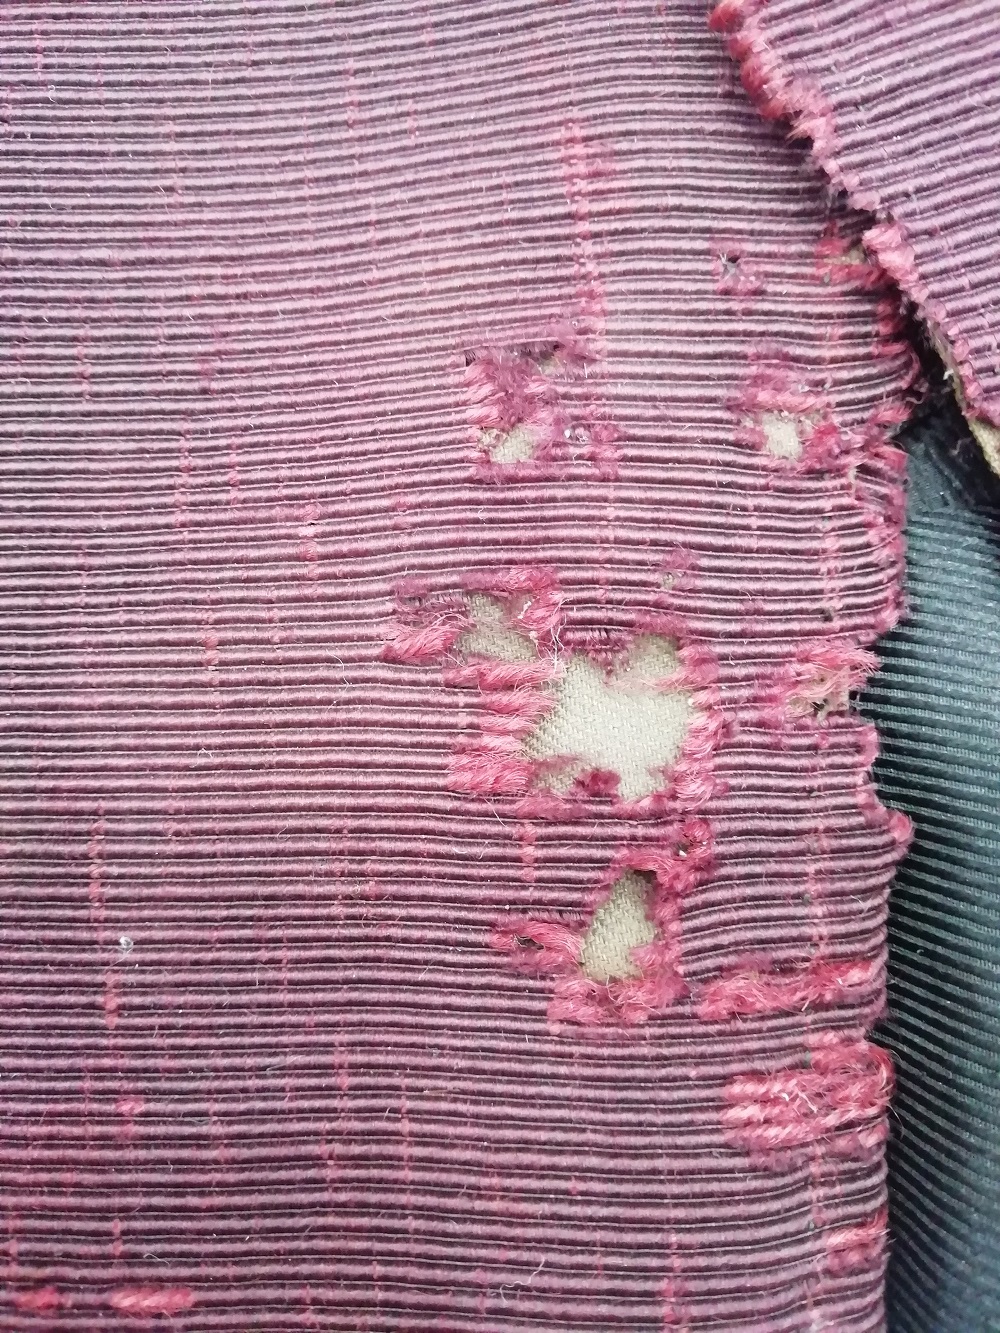 Damage to the front of the jacket resulting from pest activity, © Zenzie Tinker Conservation